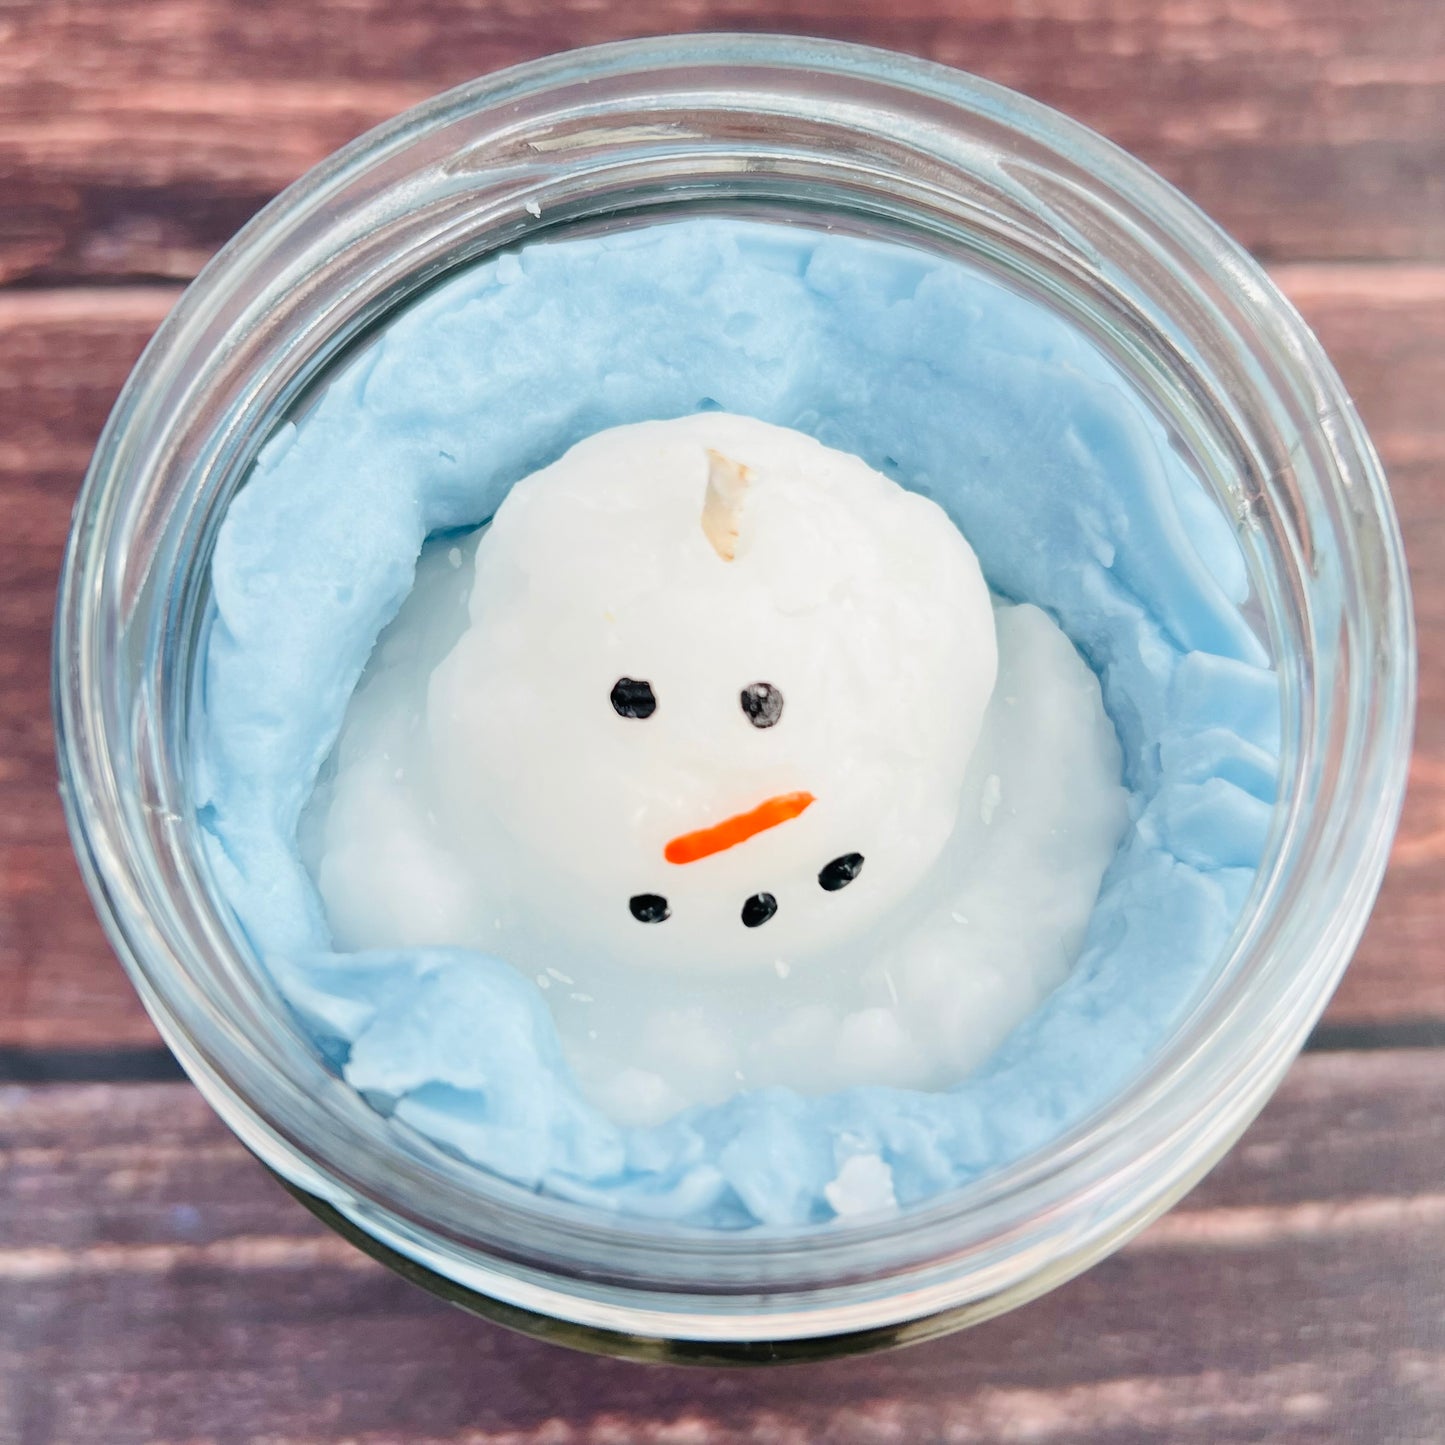 Worth Melting For… Whipped Candle